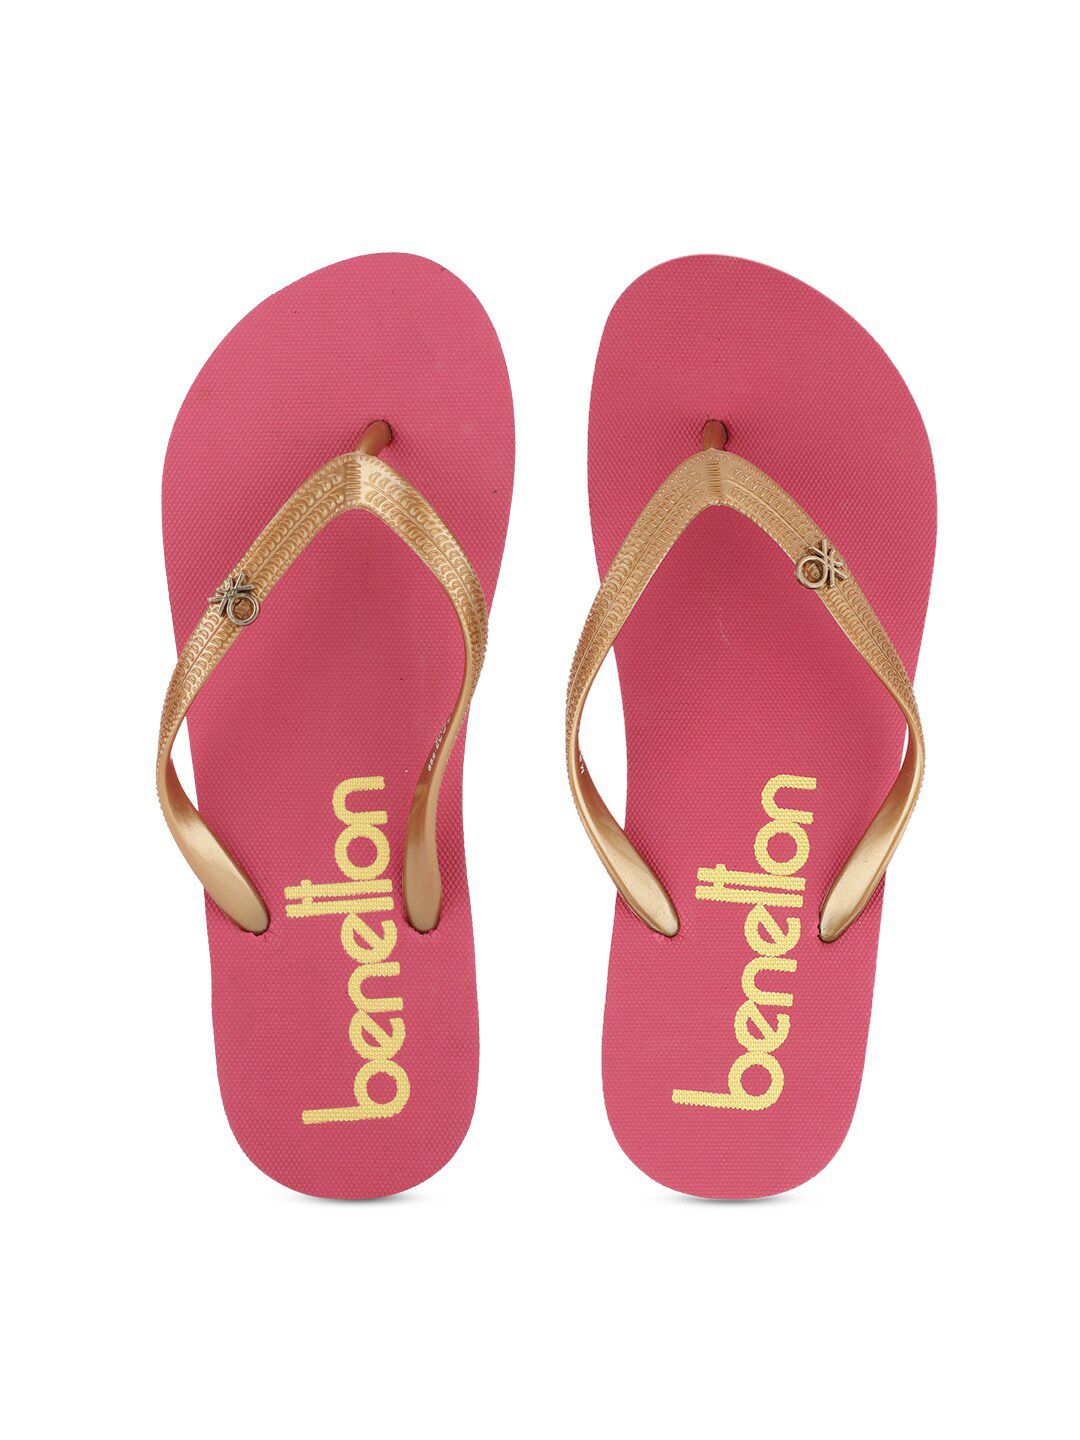 United Colors of Benetton Women Fuchsia & Gold Tong Flip Flops Price in India